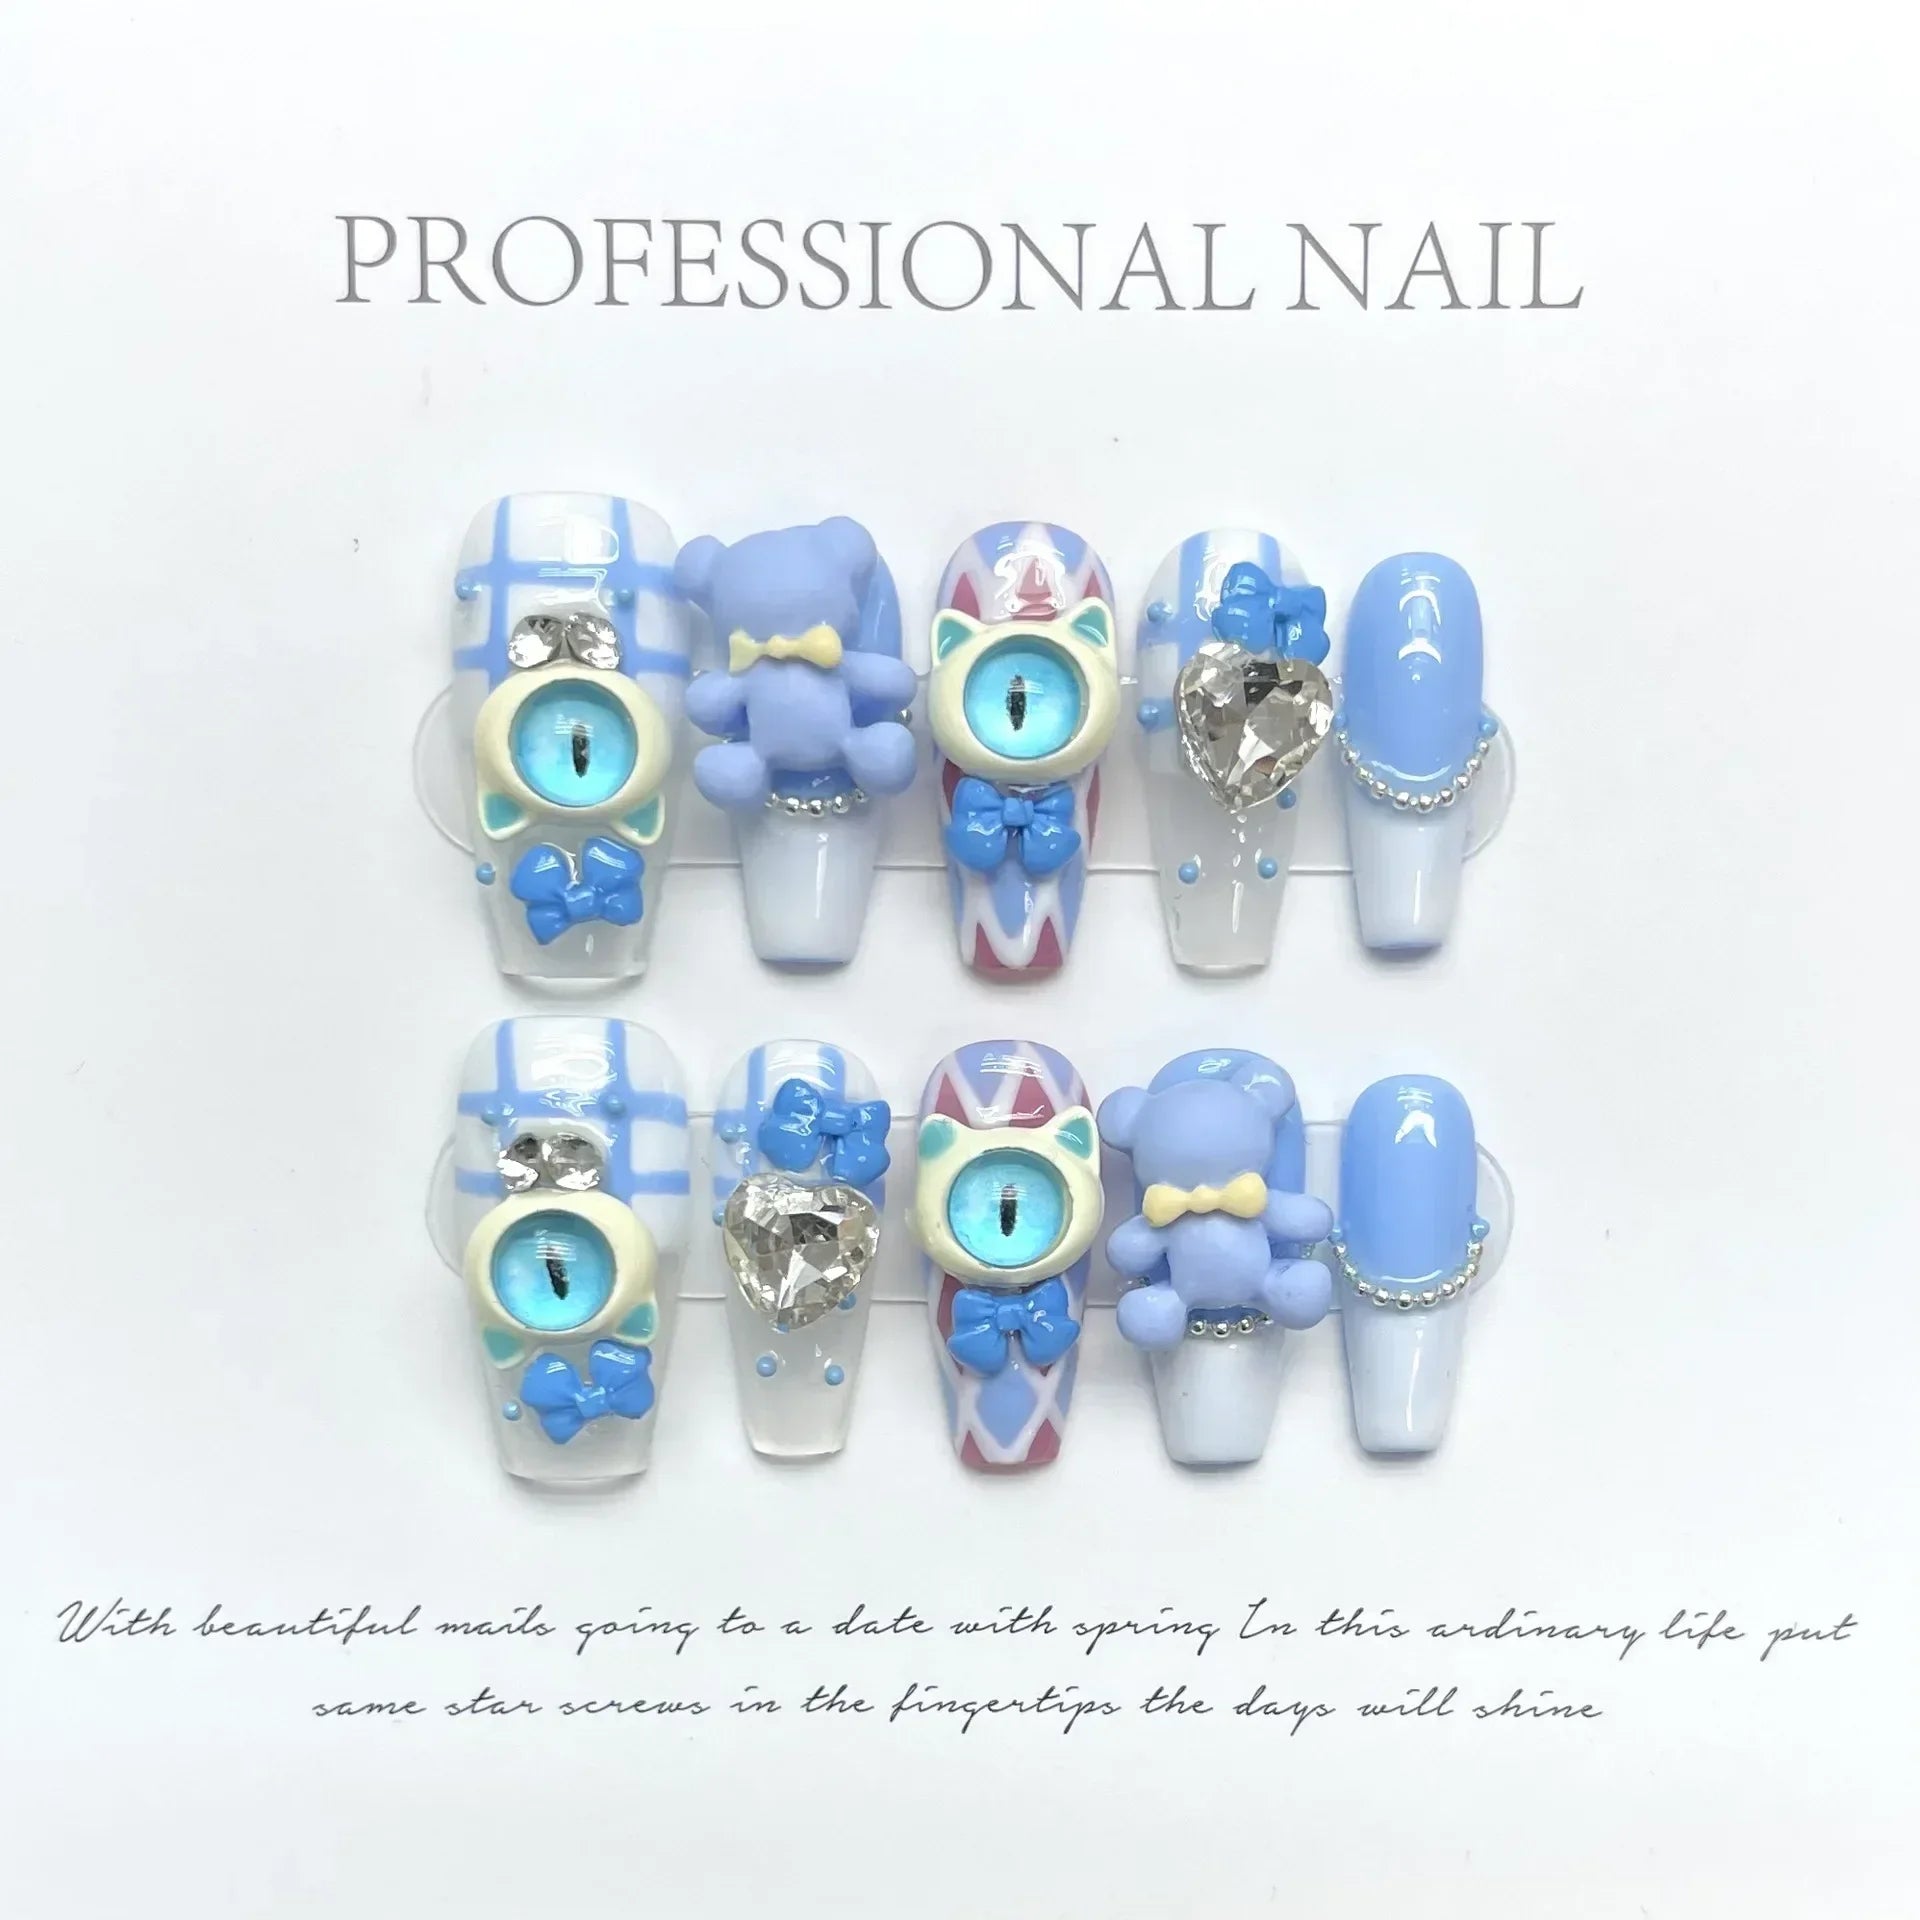 10Pcs Handmade Press On Nails with Eye Little Monster Design Wearable Manicure False Nails Decoration Full Cover Nail Tips Art